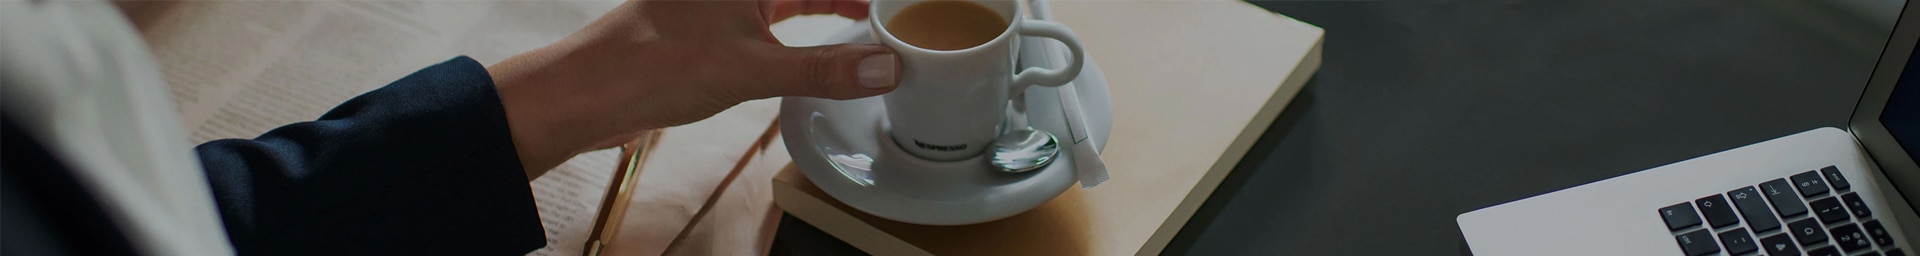 Person holding a Nespresso coffee cup with a computer next to it